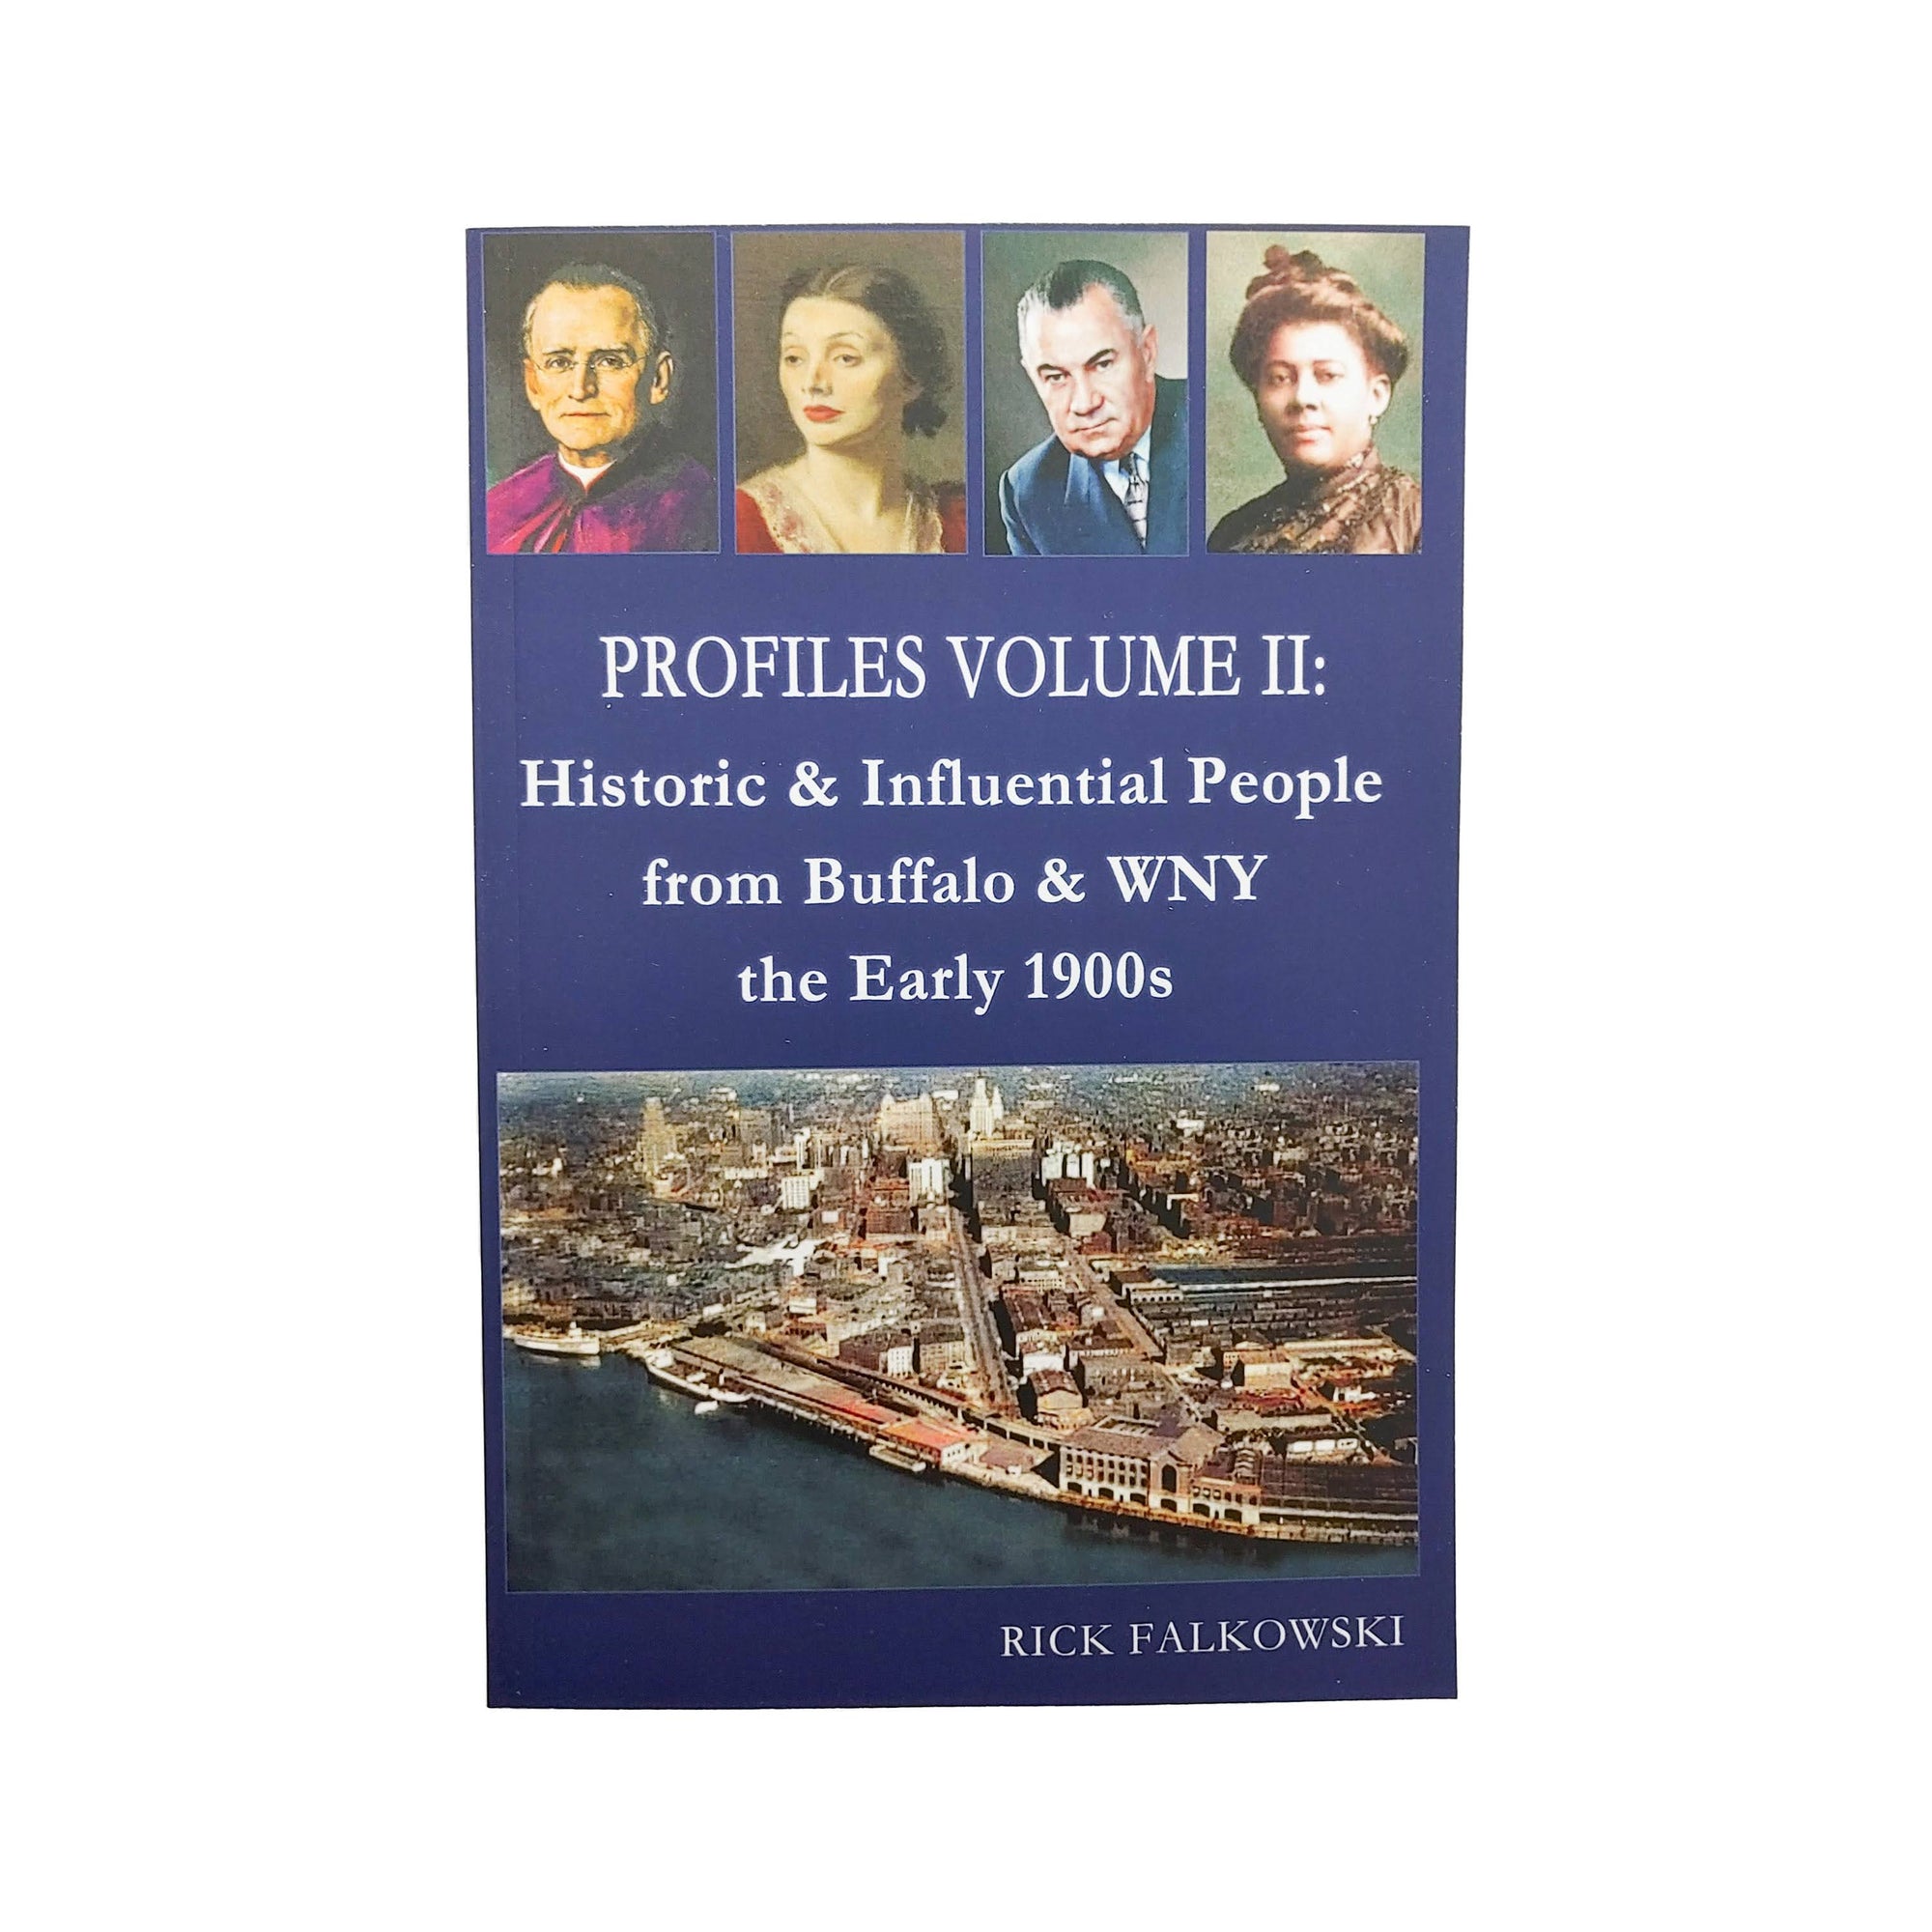 bflo store profiles volume 2 historic and influential people from buffalo and wny the early 1900s